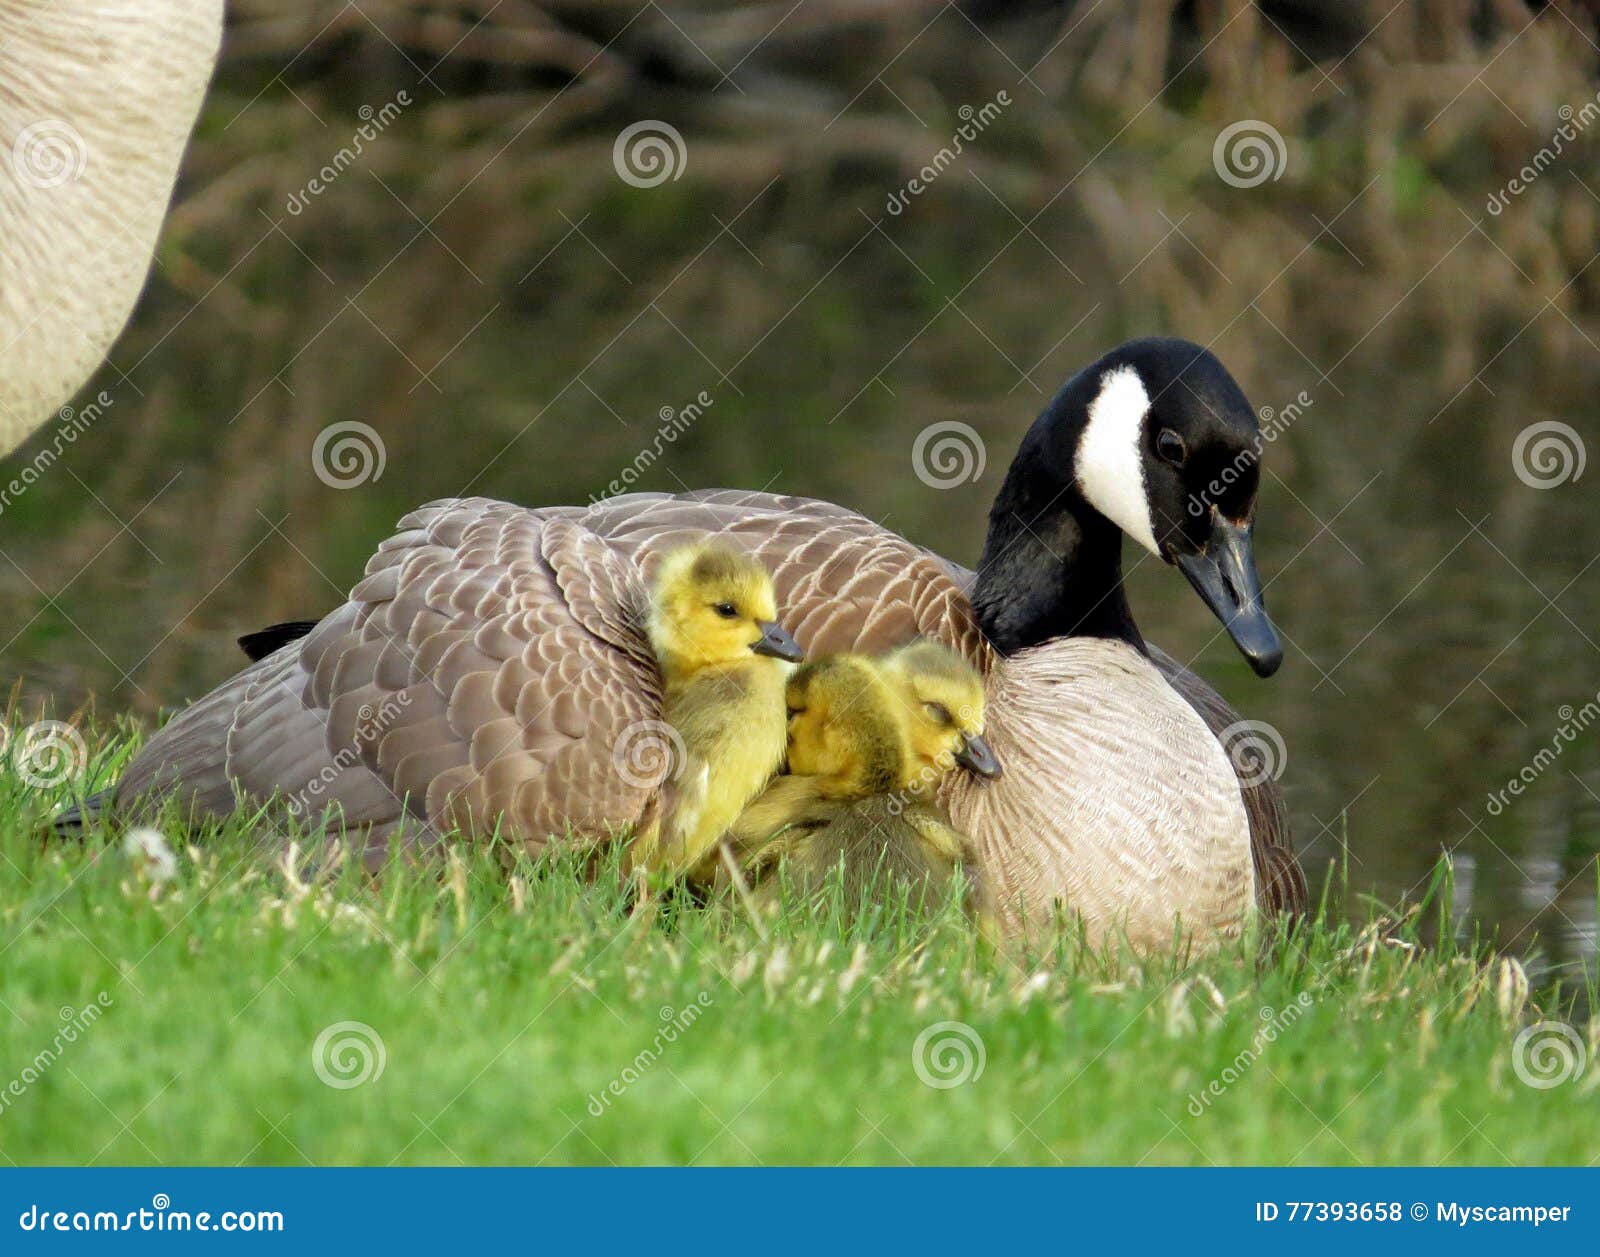 canada goose with gosling under her wing